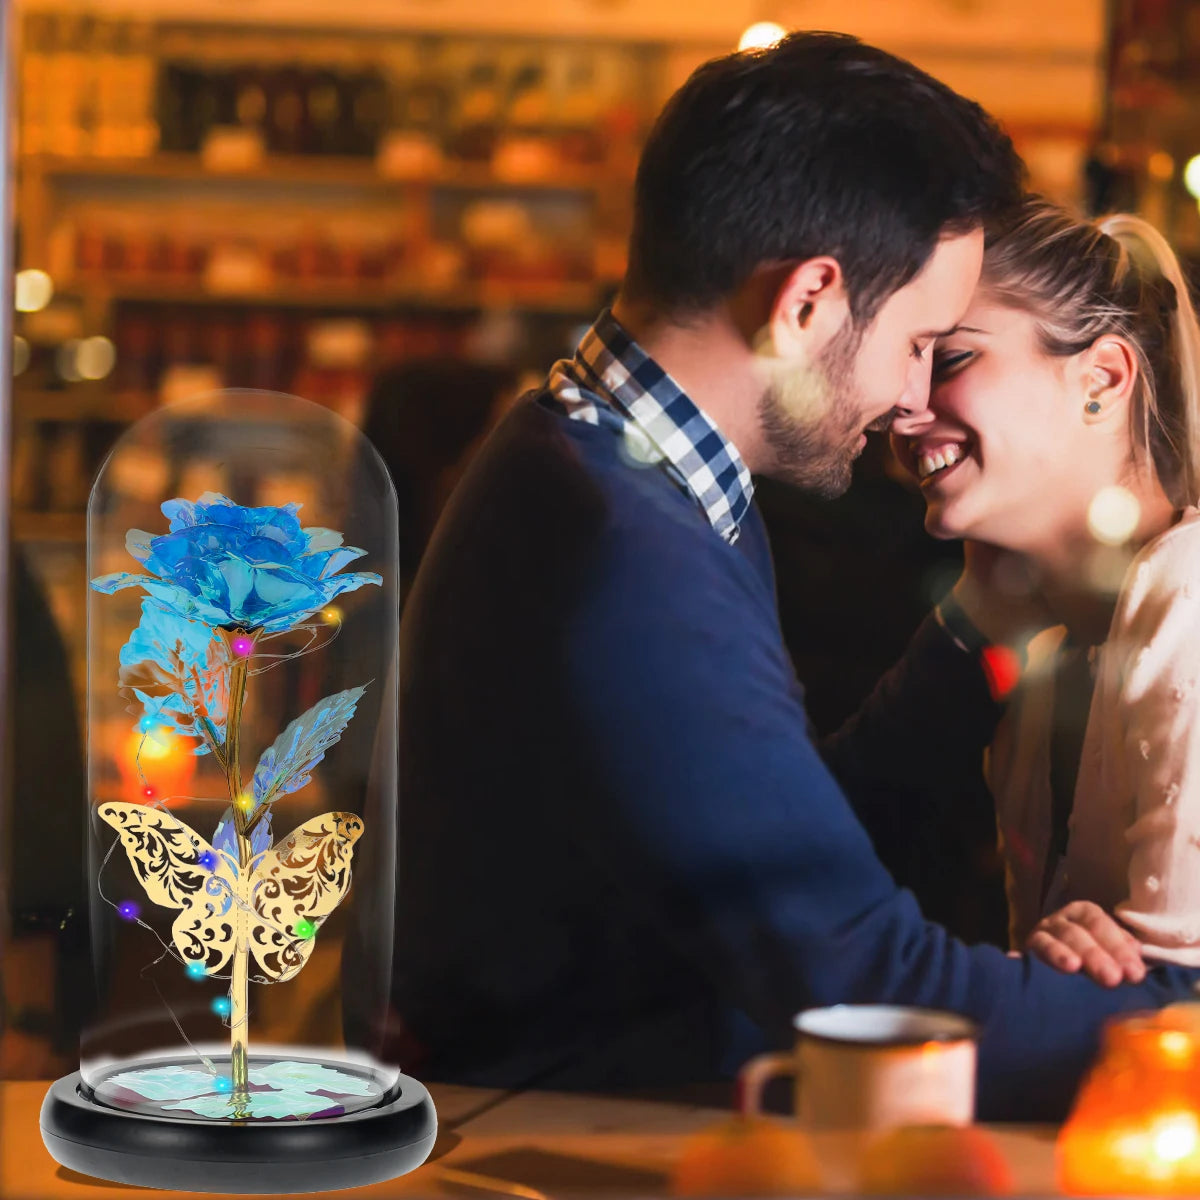 LED GALAXY ROSE ETERNAL| FLOWER WITH BUTTERFLY|IN DOME| VALENTINE'S DAY|MOTHERS'S DAY|BIRTHDAY